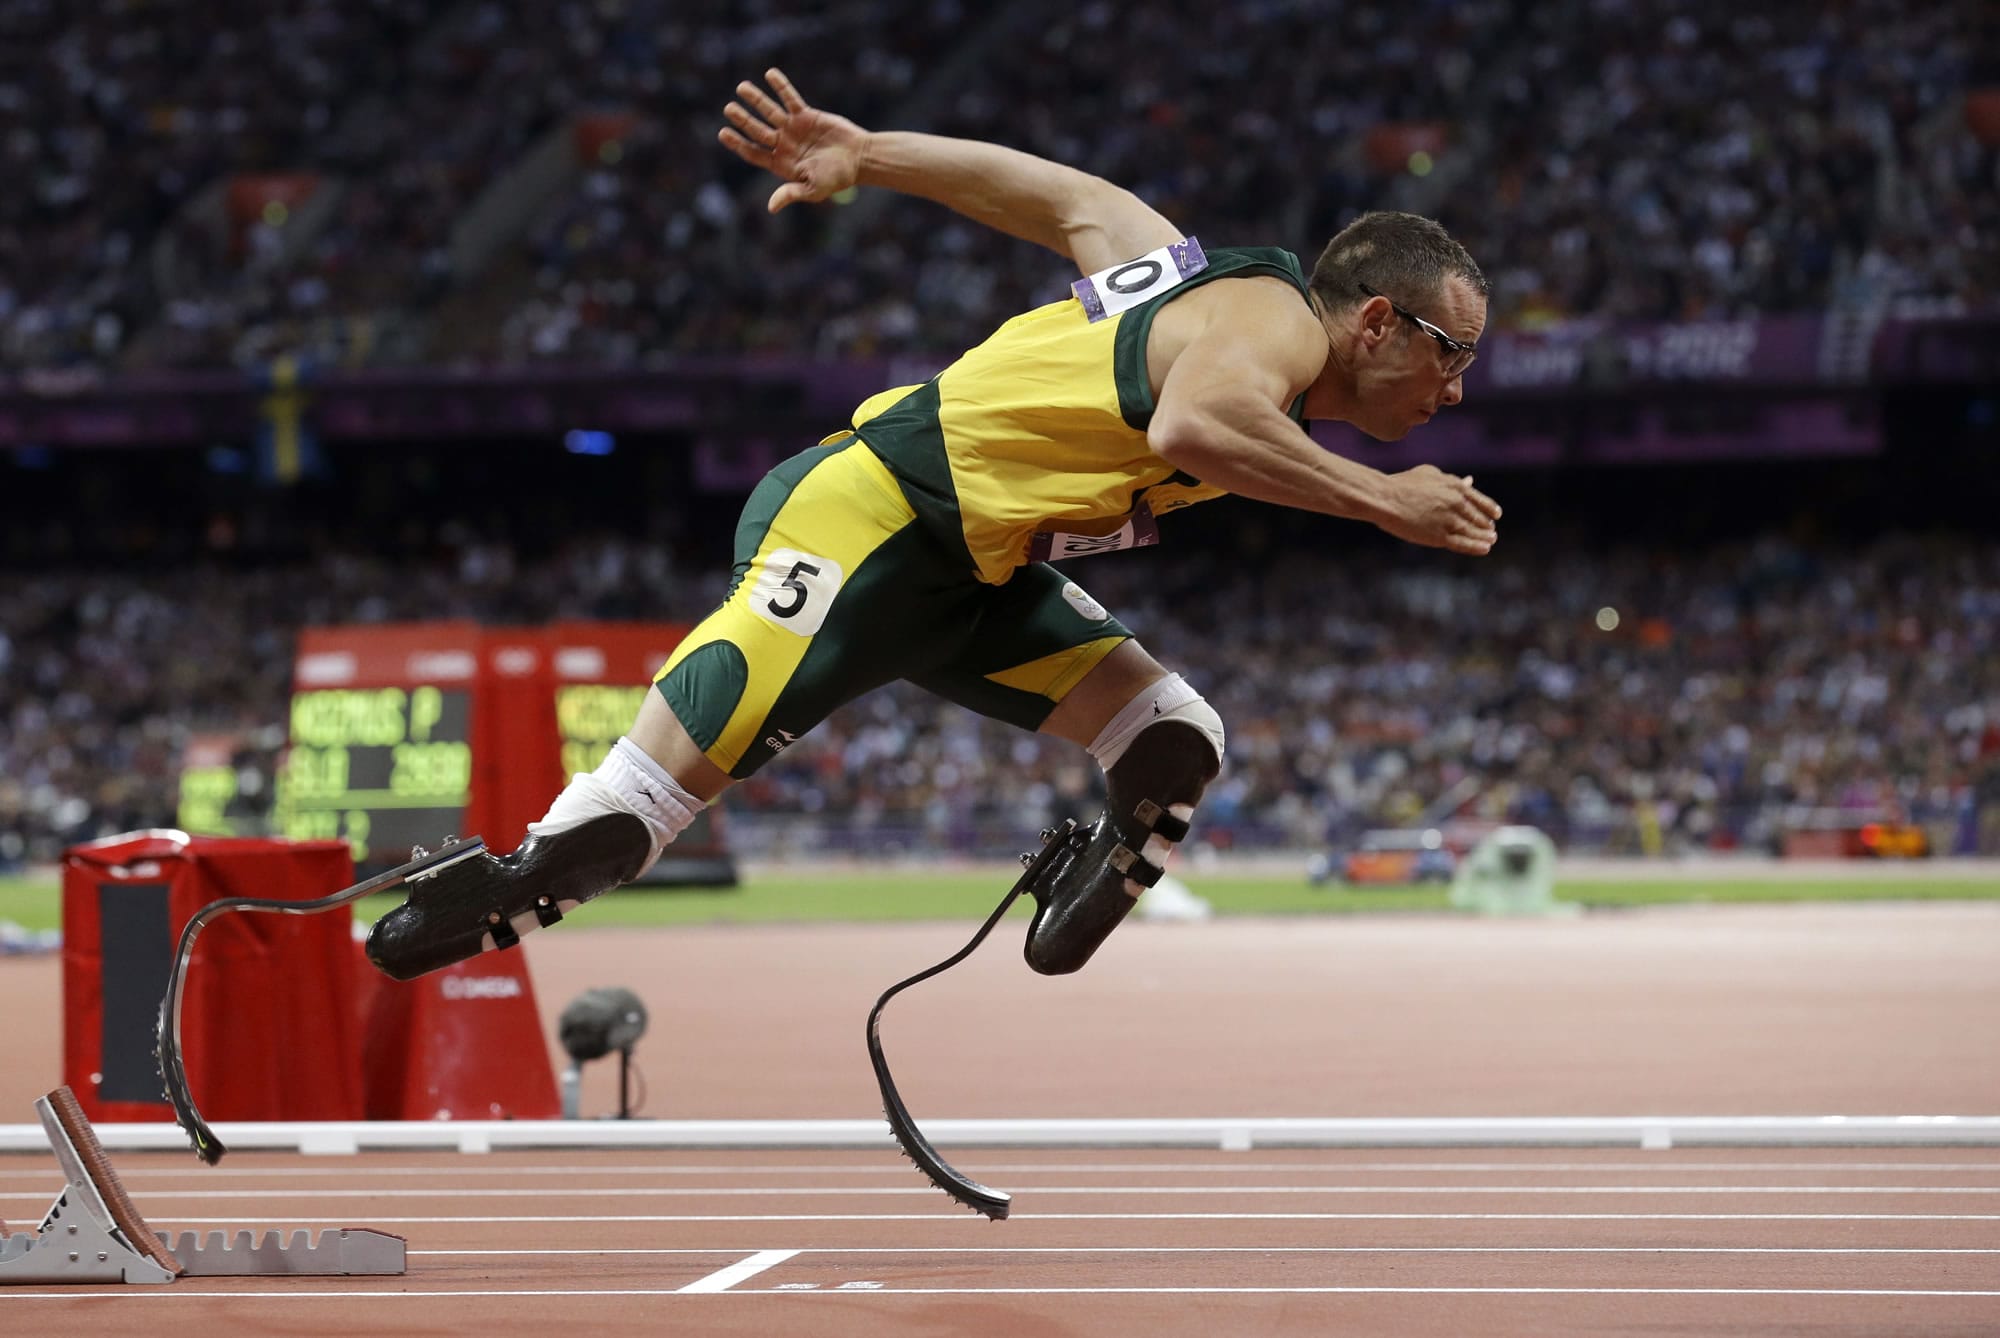 South Africa's Oscar Pistorius starts in the men's 400-meter semifinal during the 2012 Summer Olympics in London.